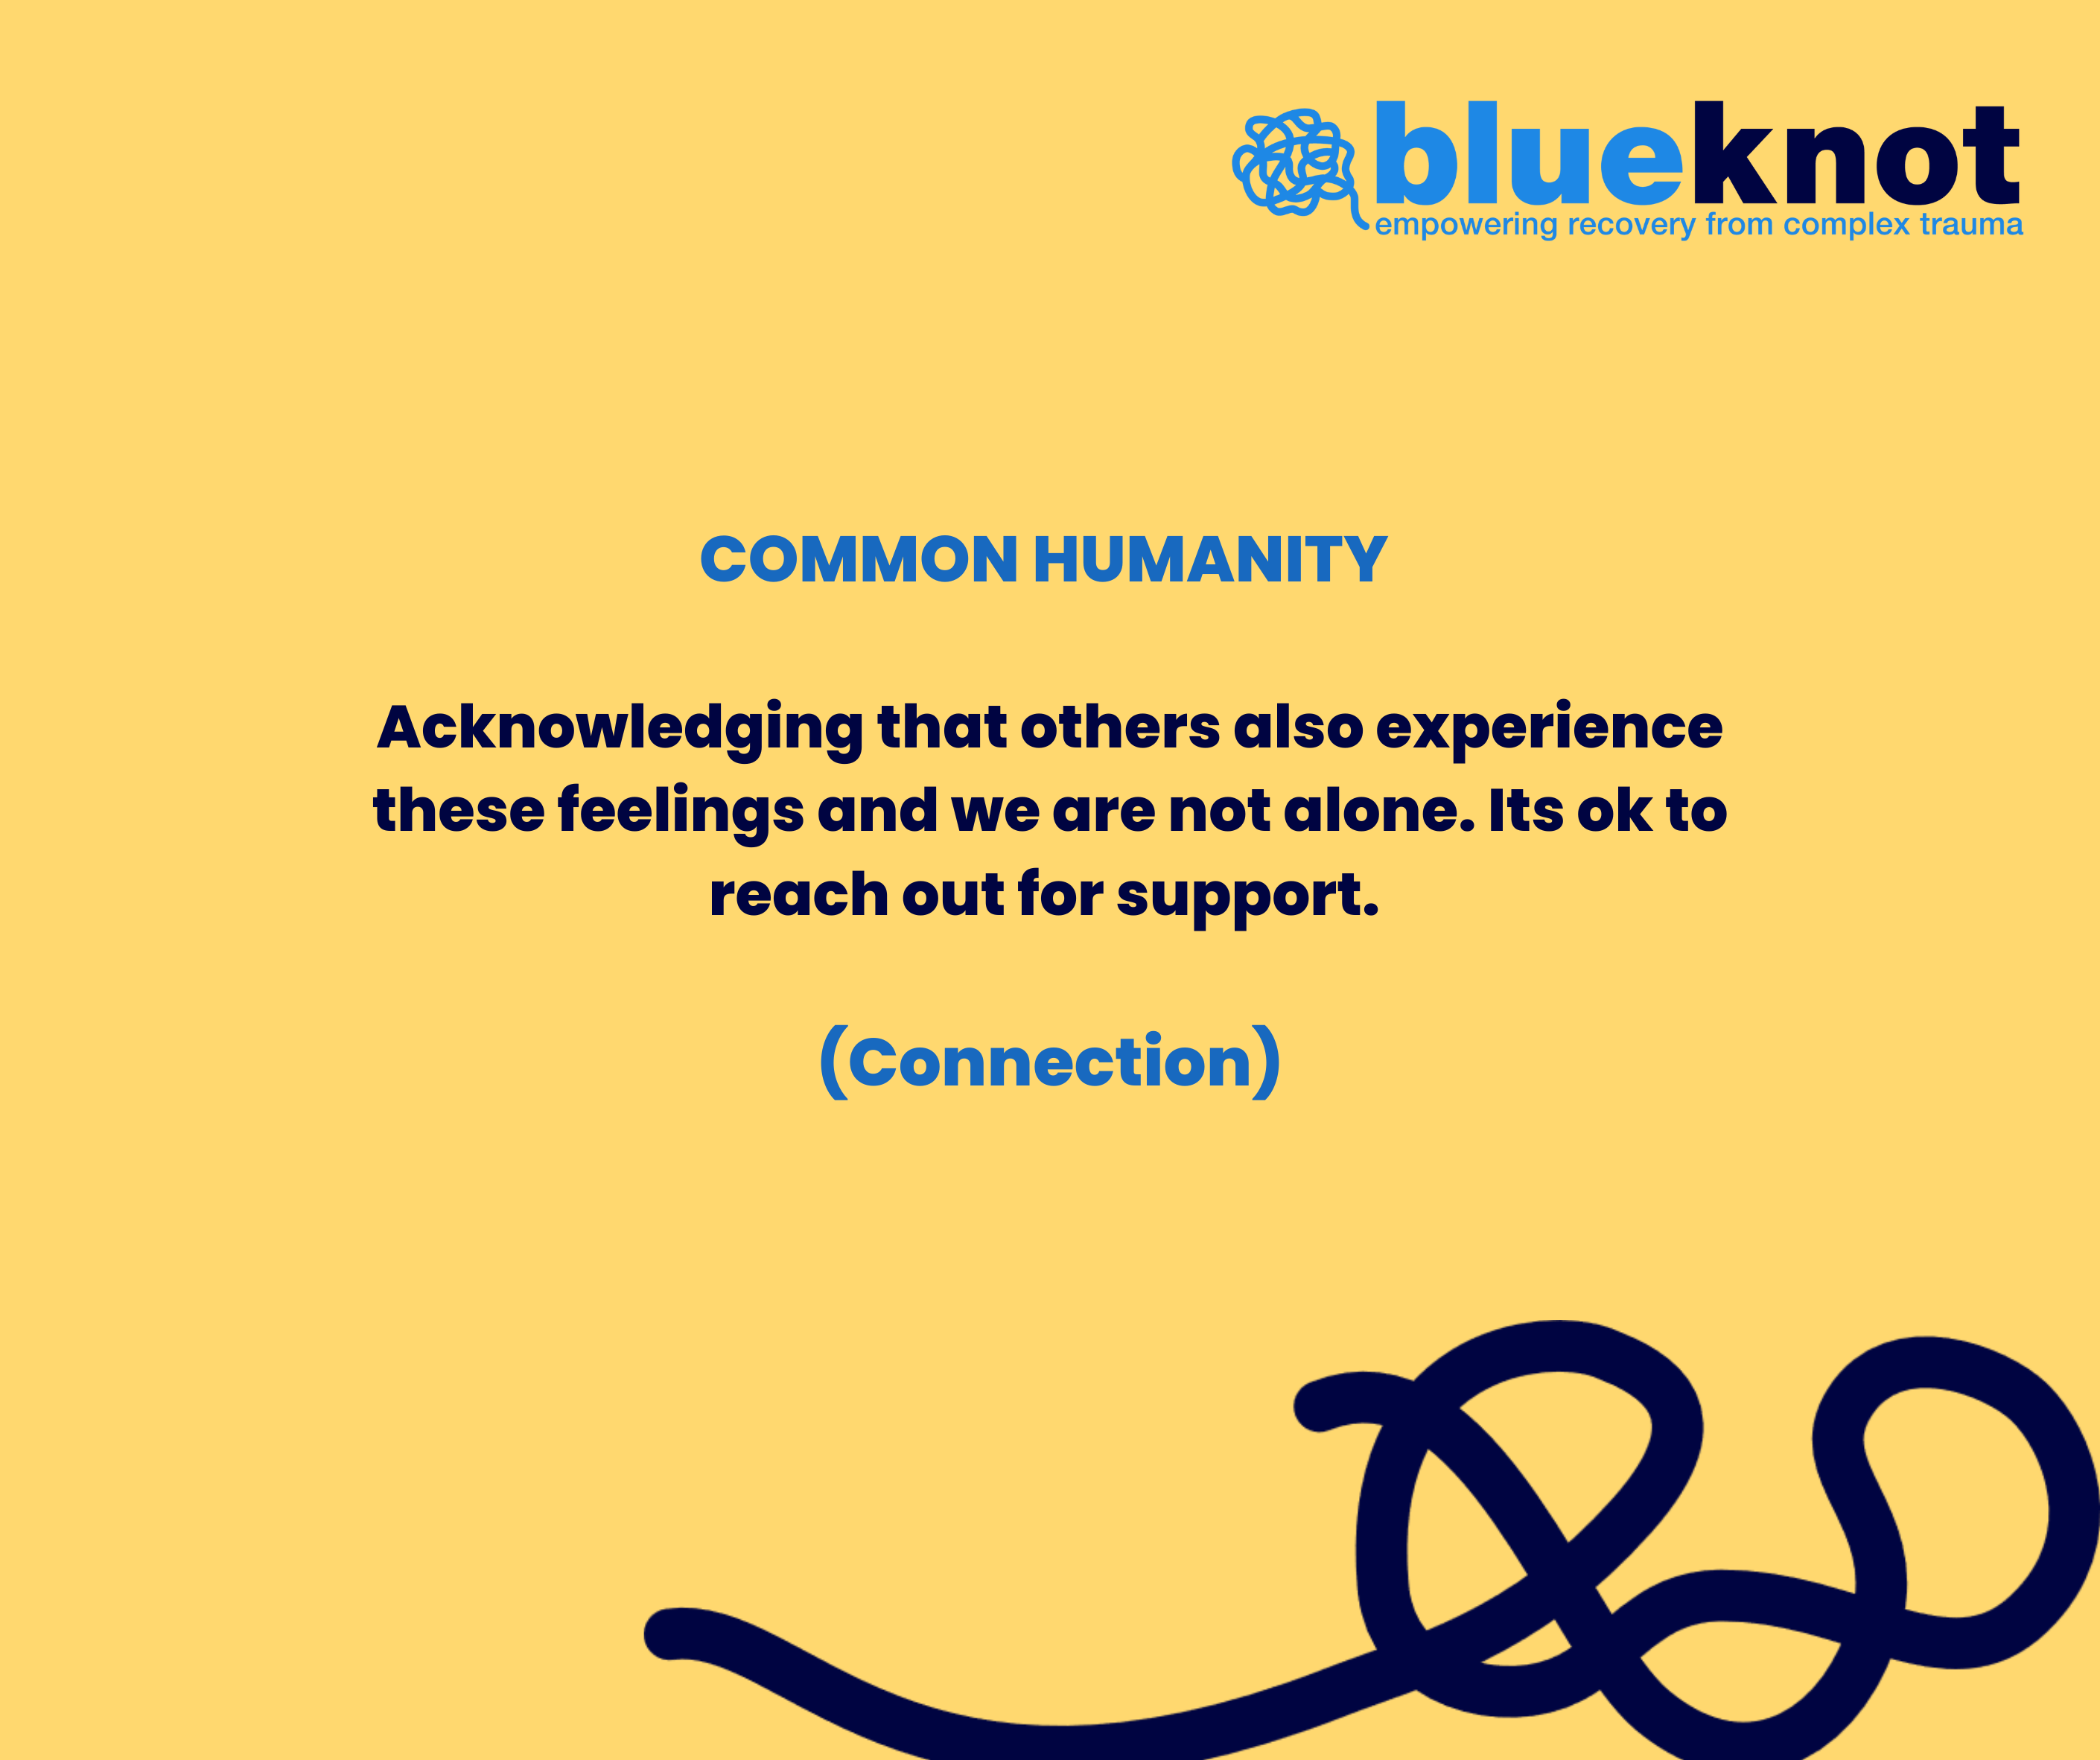 Common Humanity Acknowledging that others also experience these feelings and we are not alone. Its ok to reach out for support.